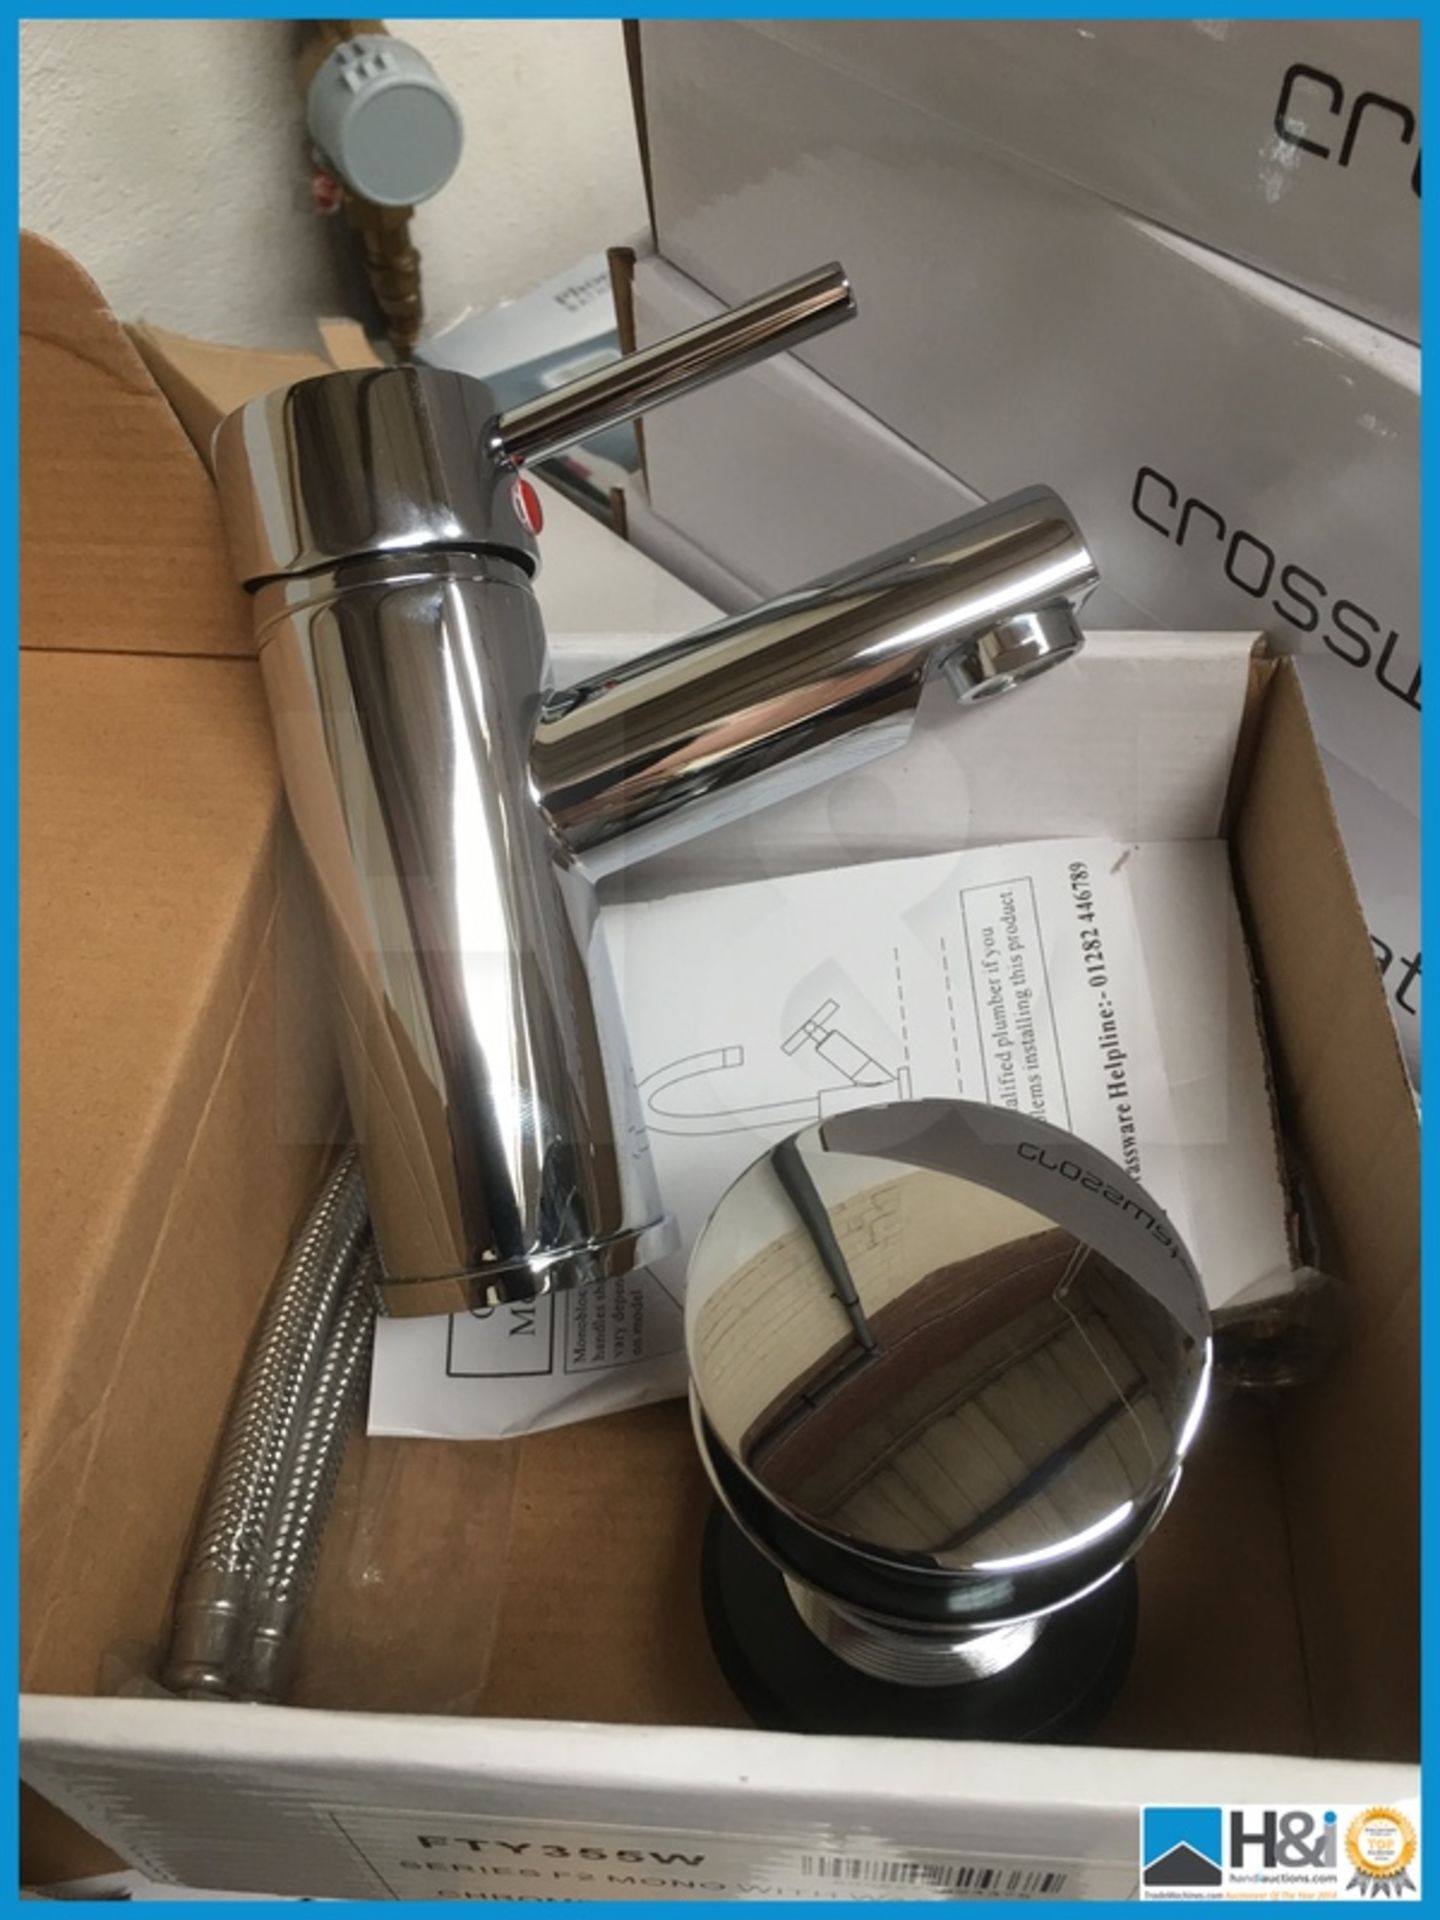 Designer Series F2 polished chrome mono basin mixer with matching waste. New and boxed. Suggested